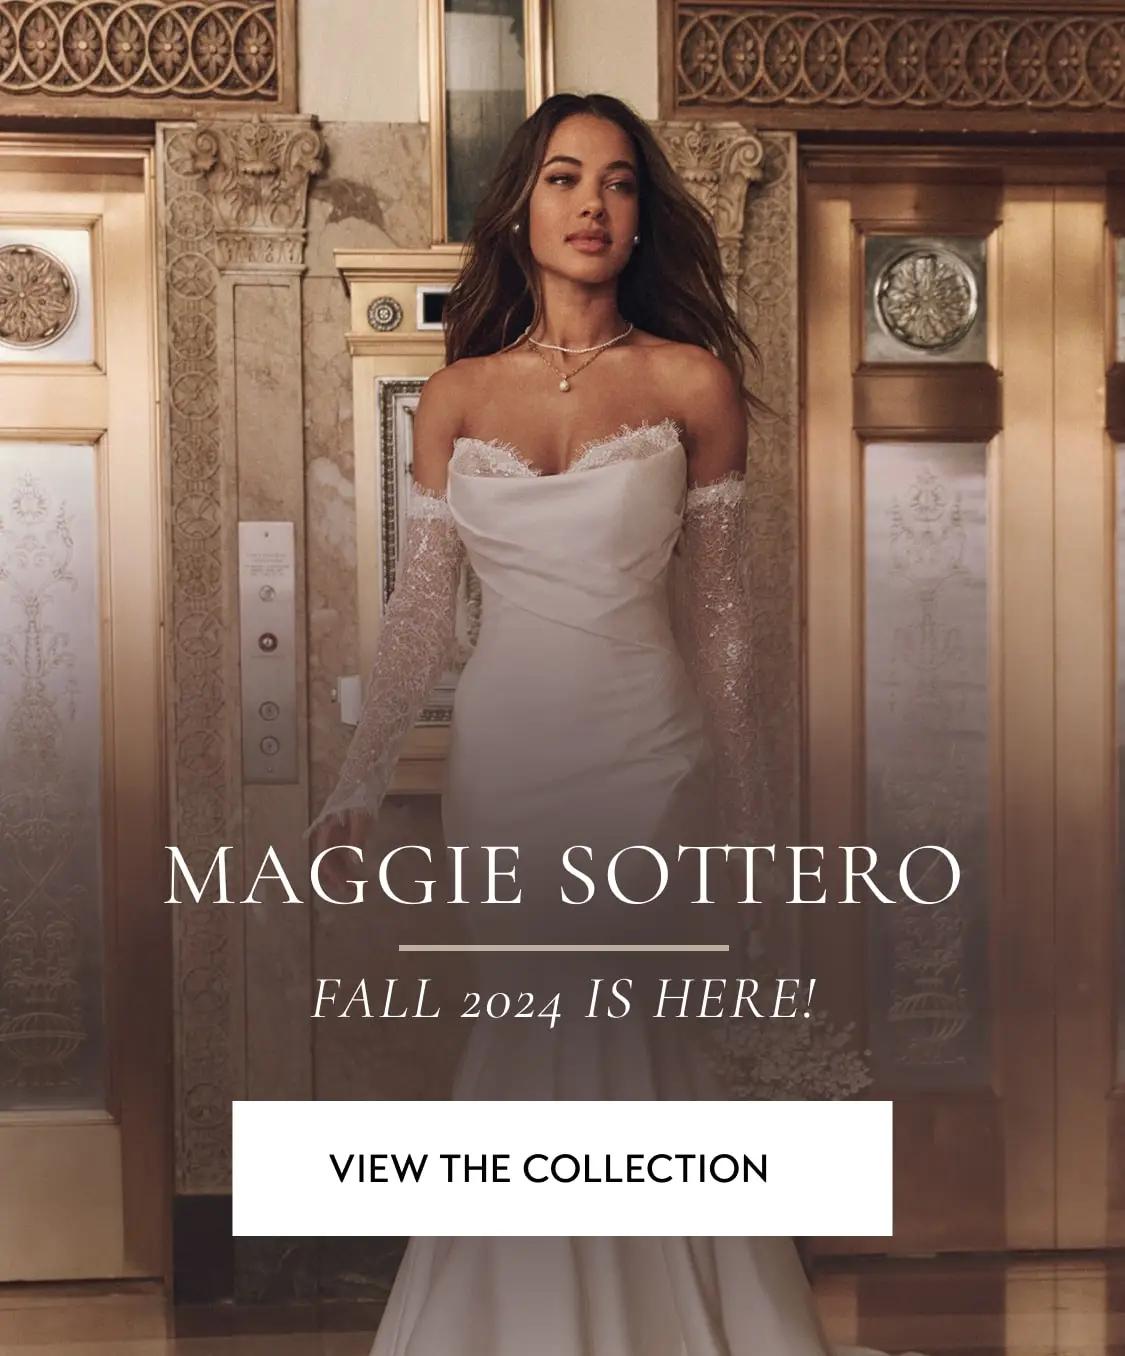 Mobile Maggie Sottero Fall 2024 Banner